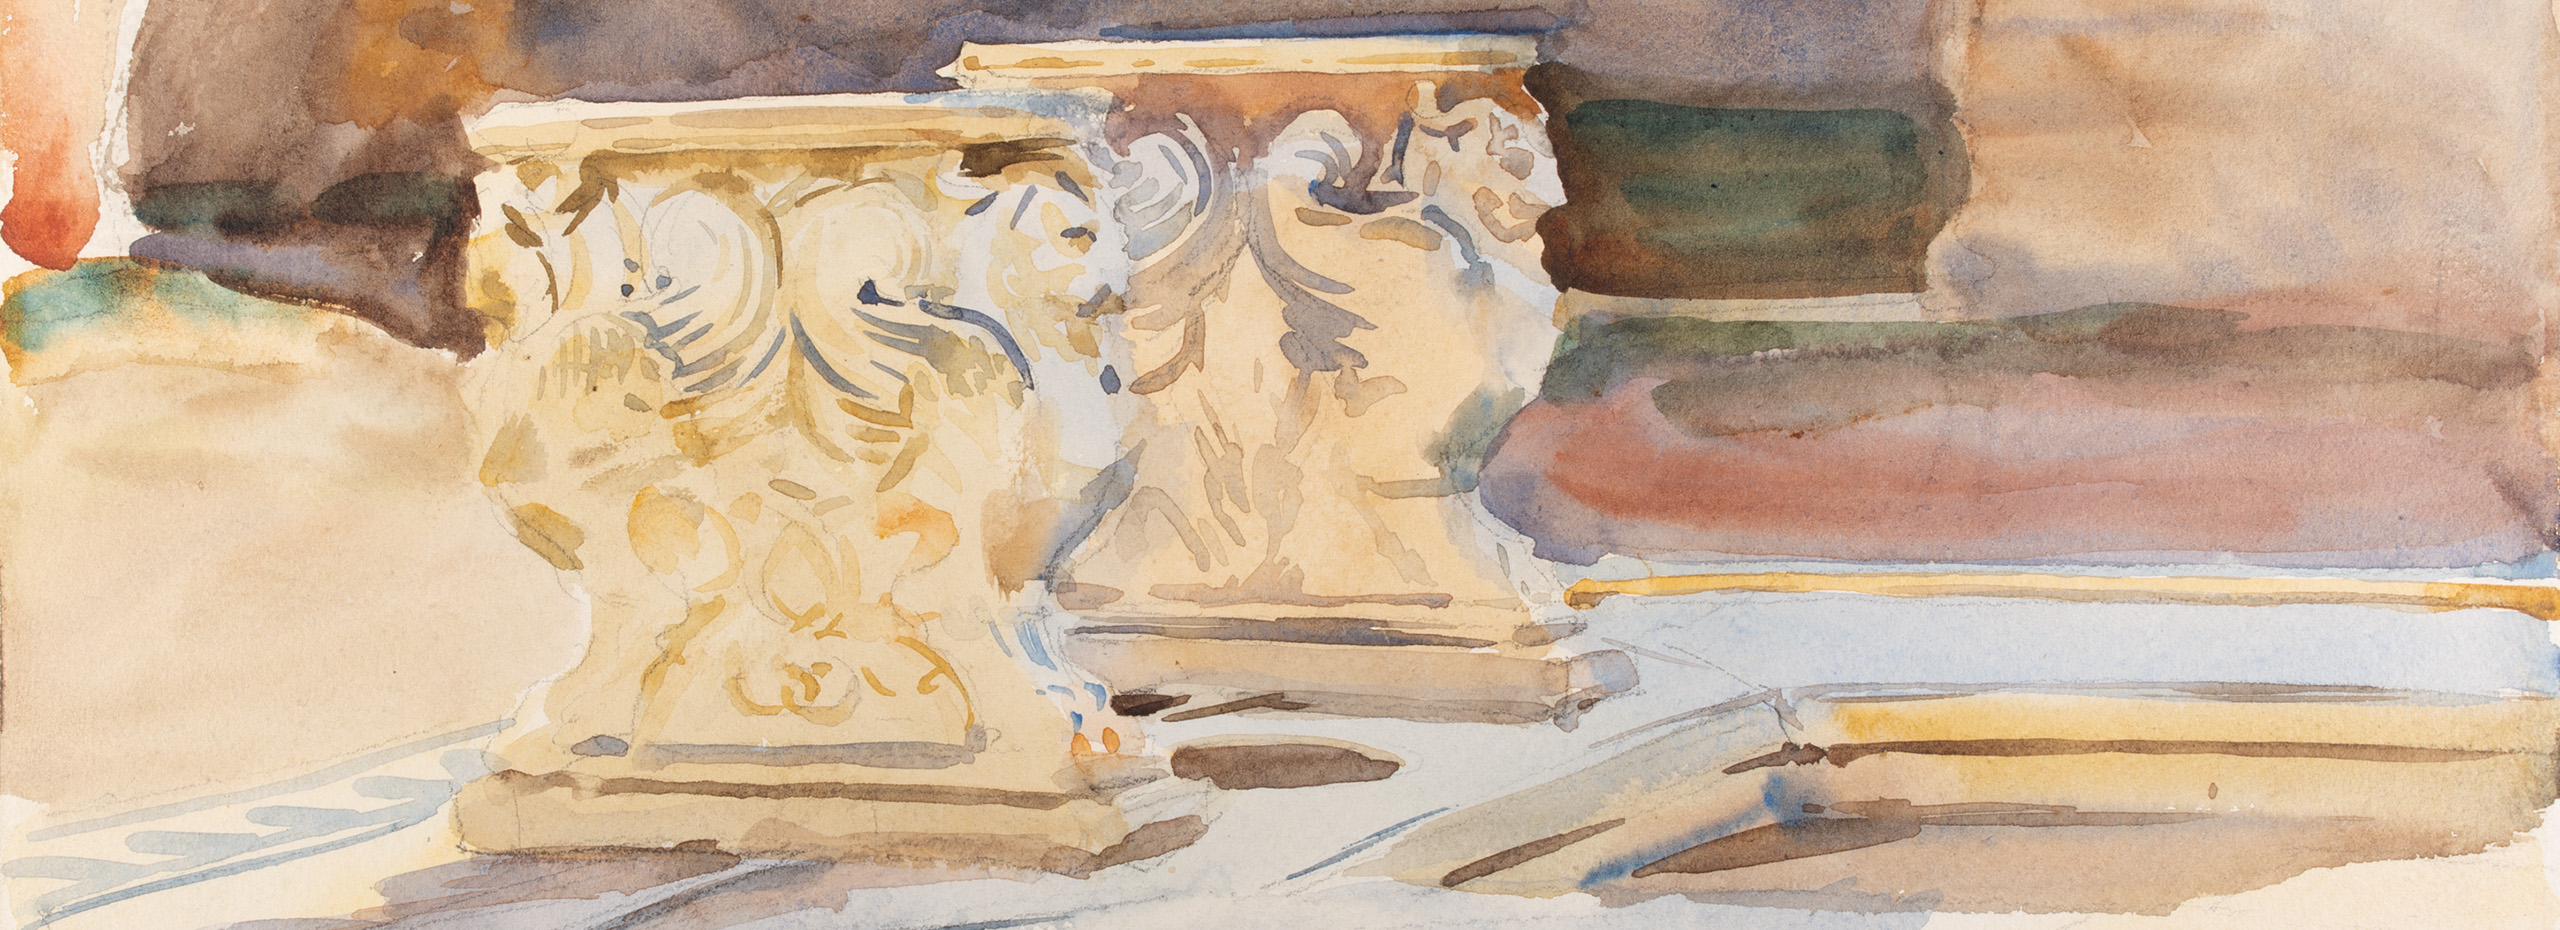 A watercolor of Roman architectural details